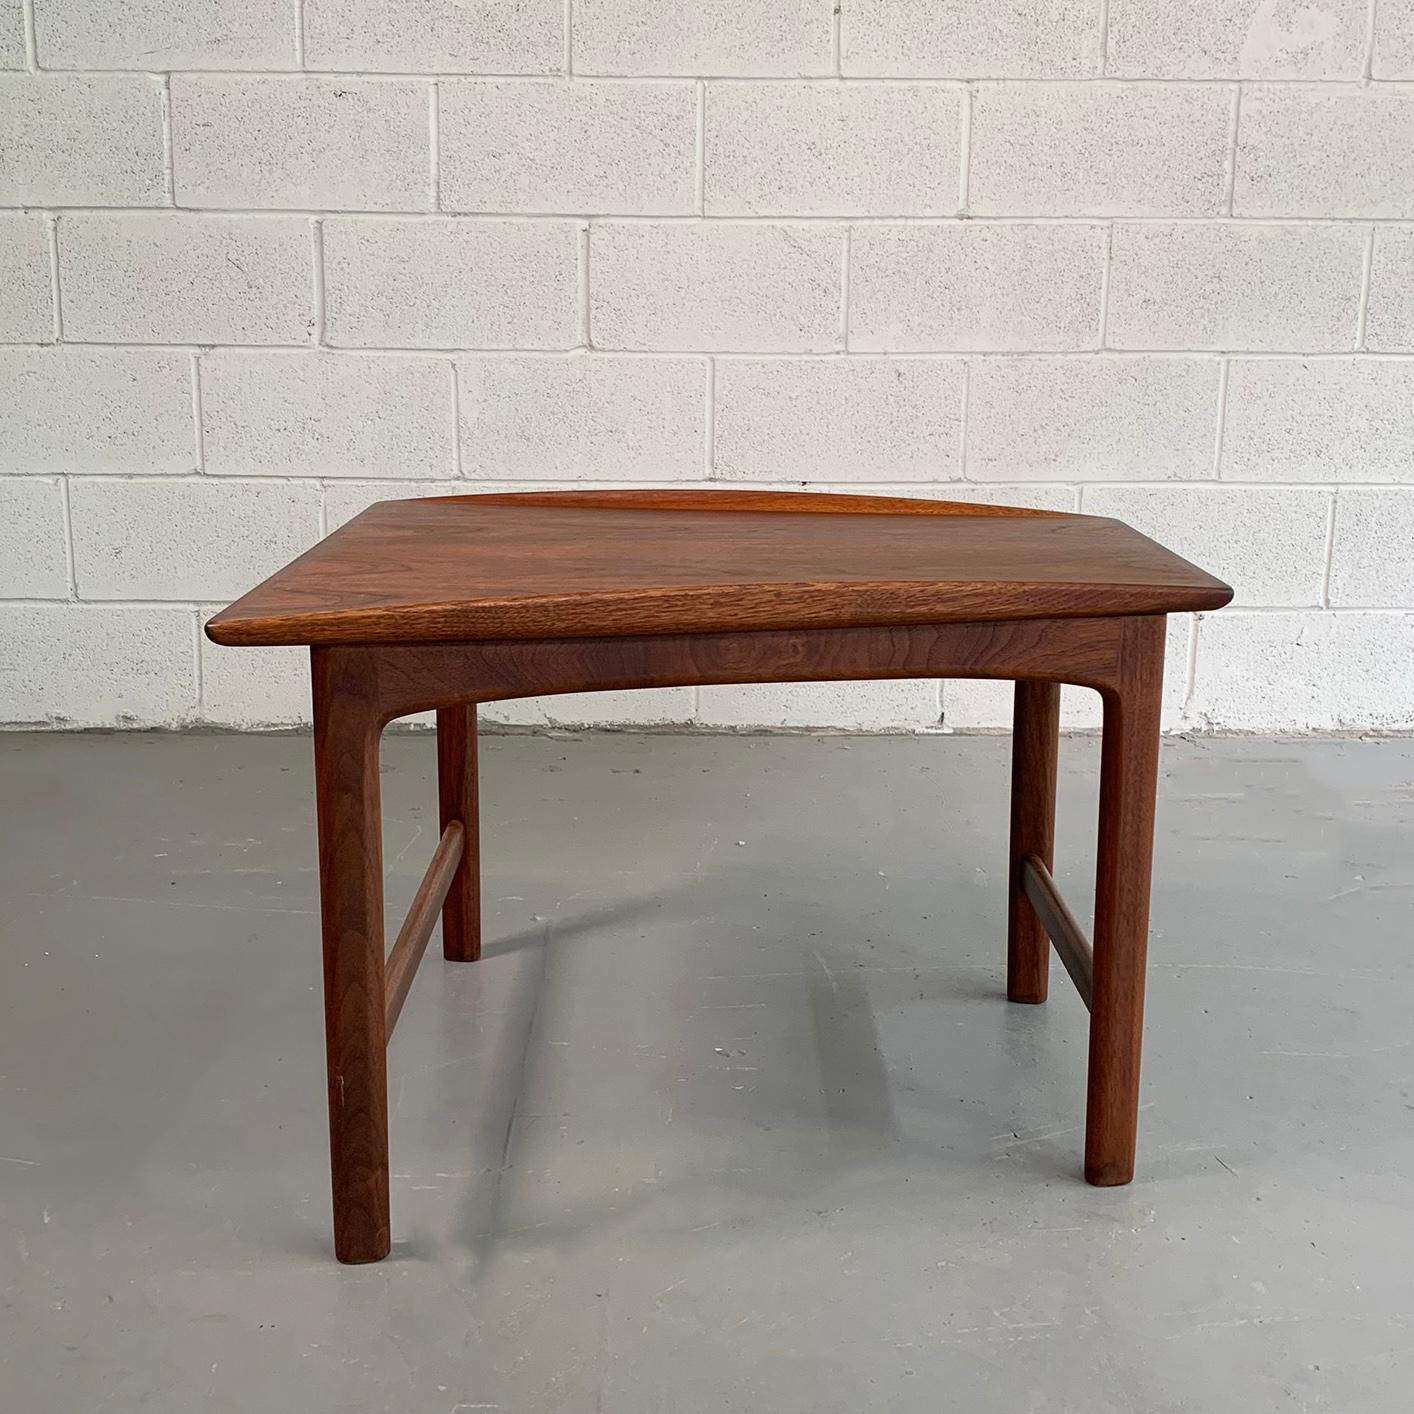 Scandinavian Modern Tapered Teak Side Table by Folke Ohlsson for DUX In Good Condition For Sale In Brooklyn, NY